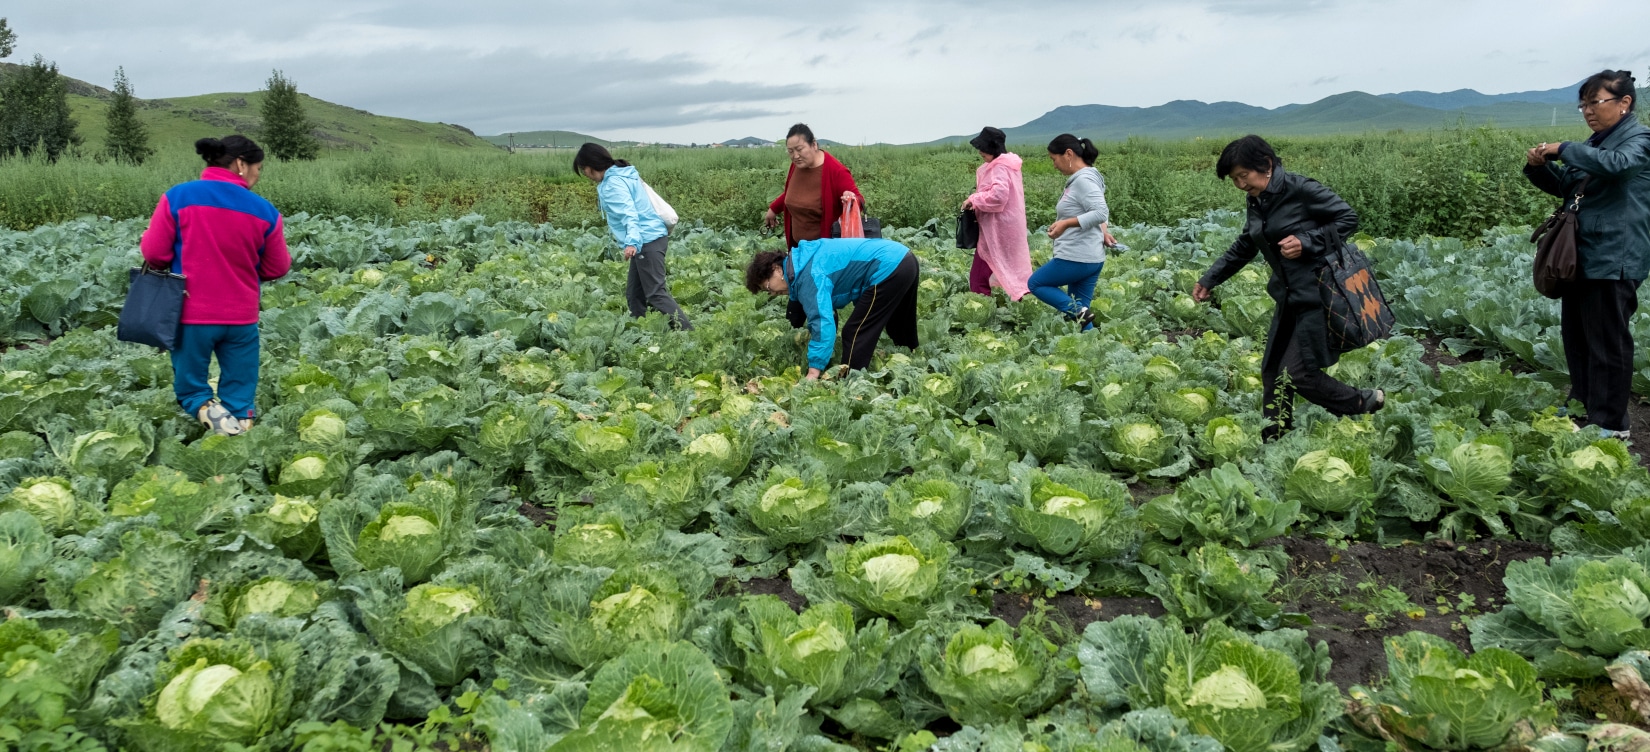 Sustainable vegetable production and food security – priority concerns in rural Mongolia